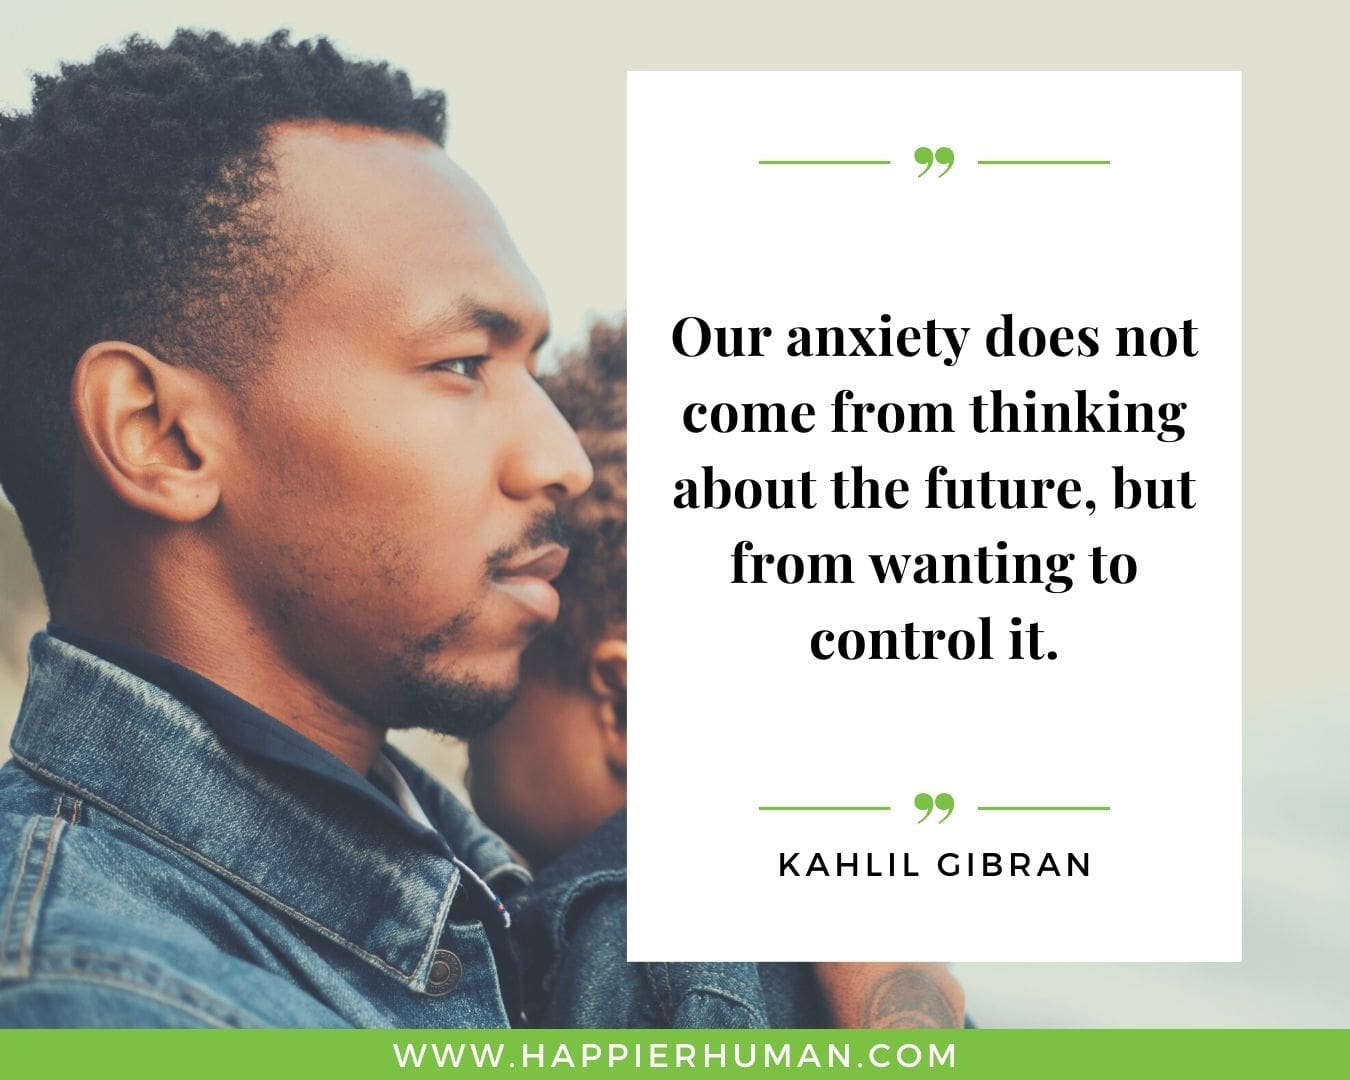 Overthinking Quotes - "Our anxiety does not come from thinking about the future, but from wanting to control it." - Kahlil Gibran